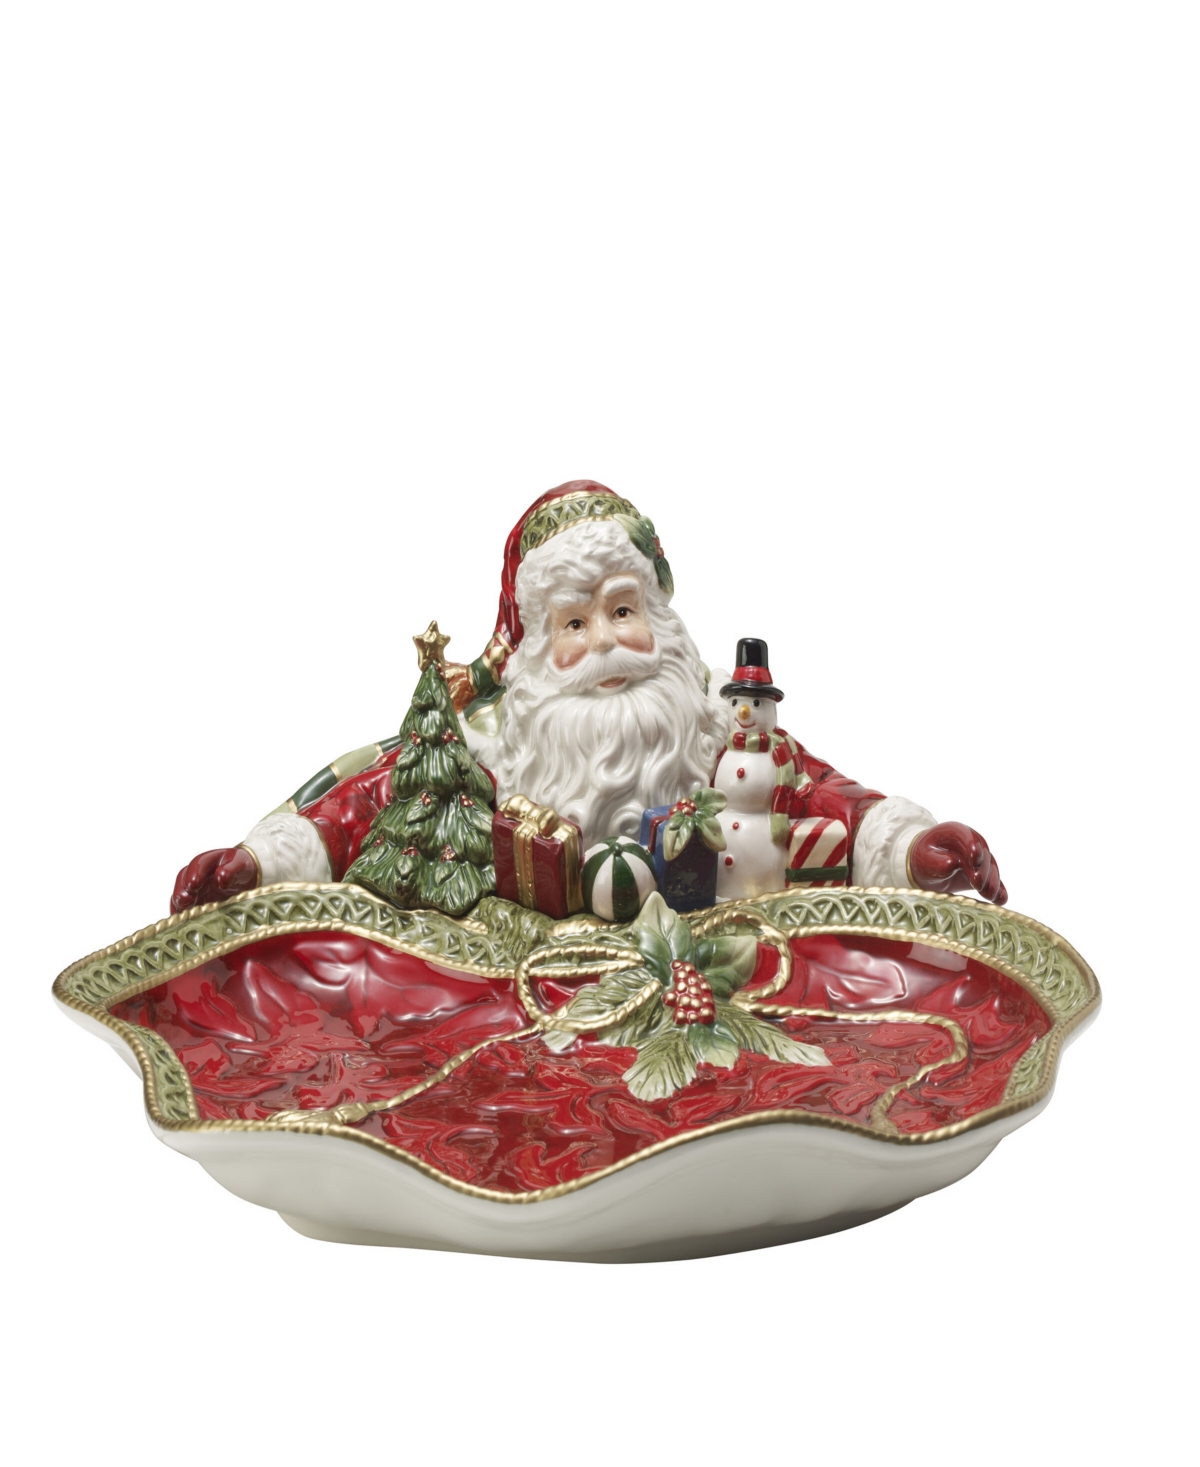 FITZ AND FLOYD HOLIDAY HOME SANTA SERVER, 13.5-IN